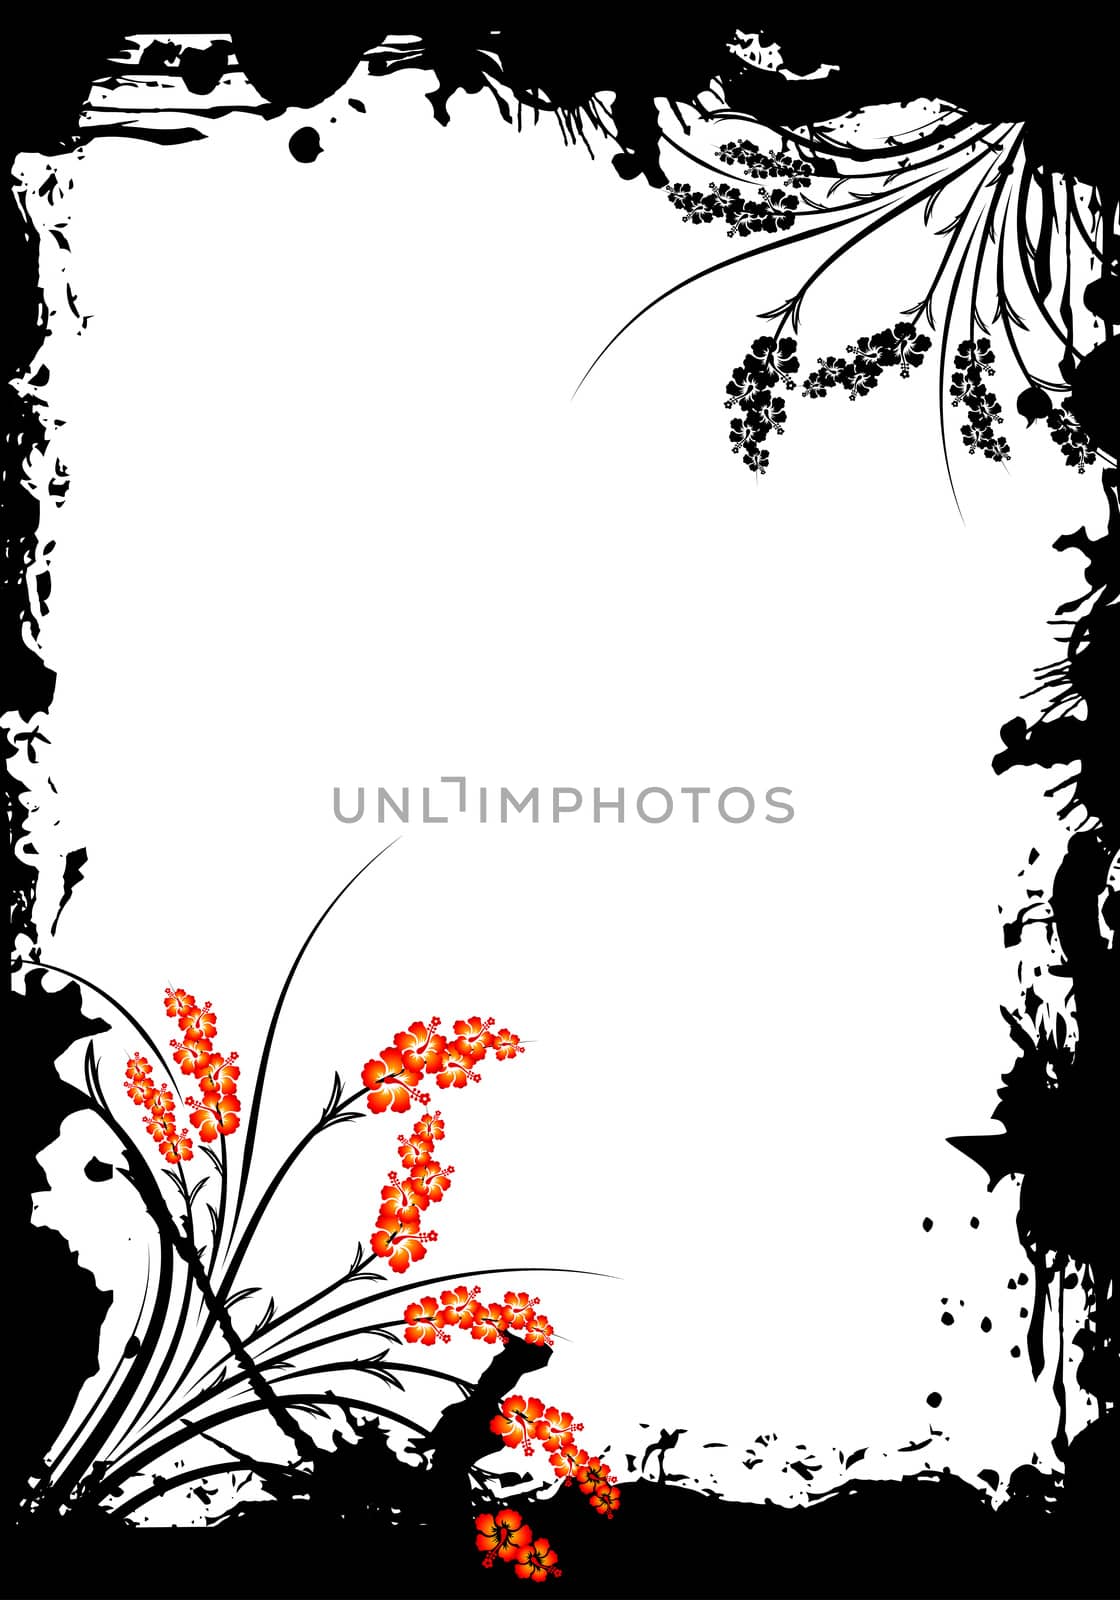 Abstract Flowers on Grunge Frame Vector Illustration